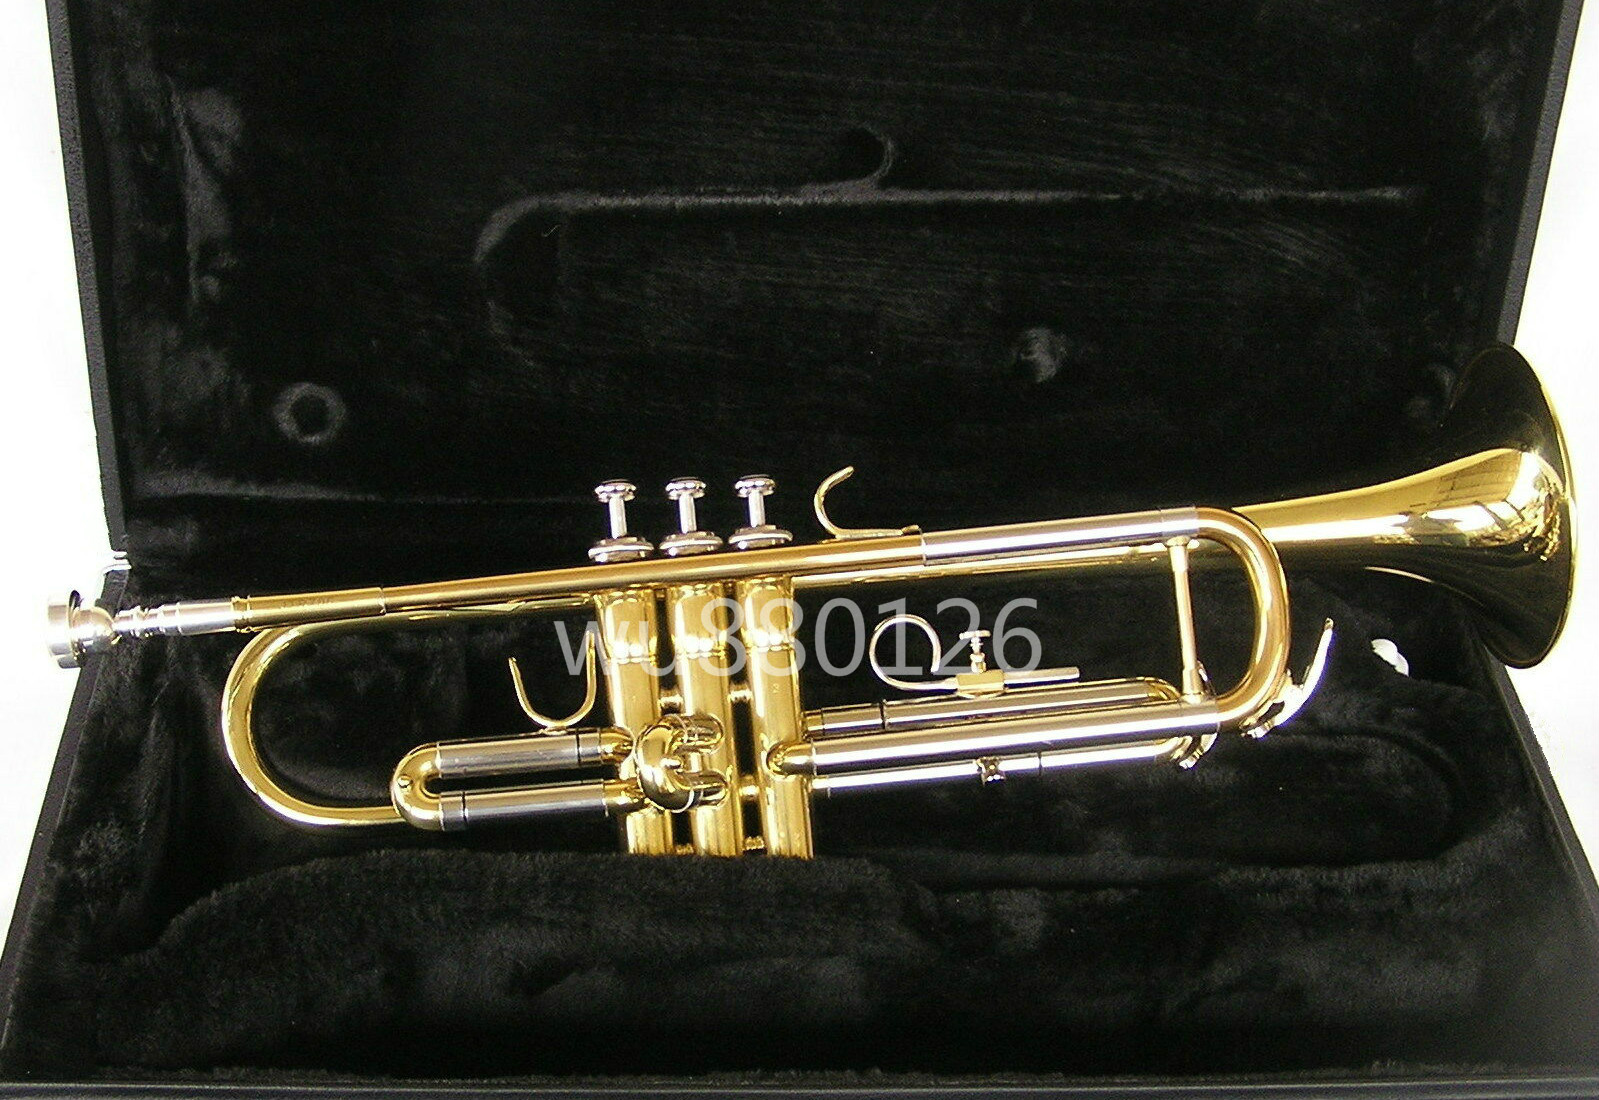 JUPITER JTR700 Bb Tune Brass Trumpet Gold Lacquer New High Quality Musical Instrument with Case Mouthpiece Free Shipping